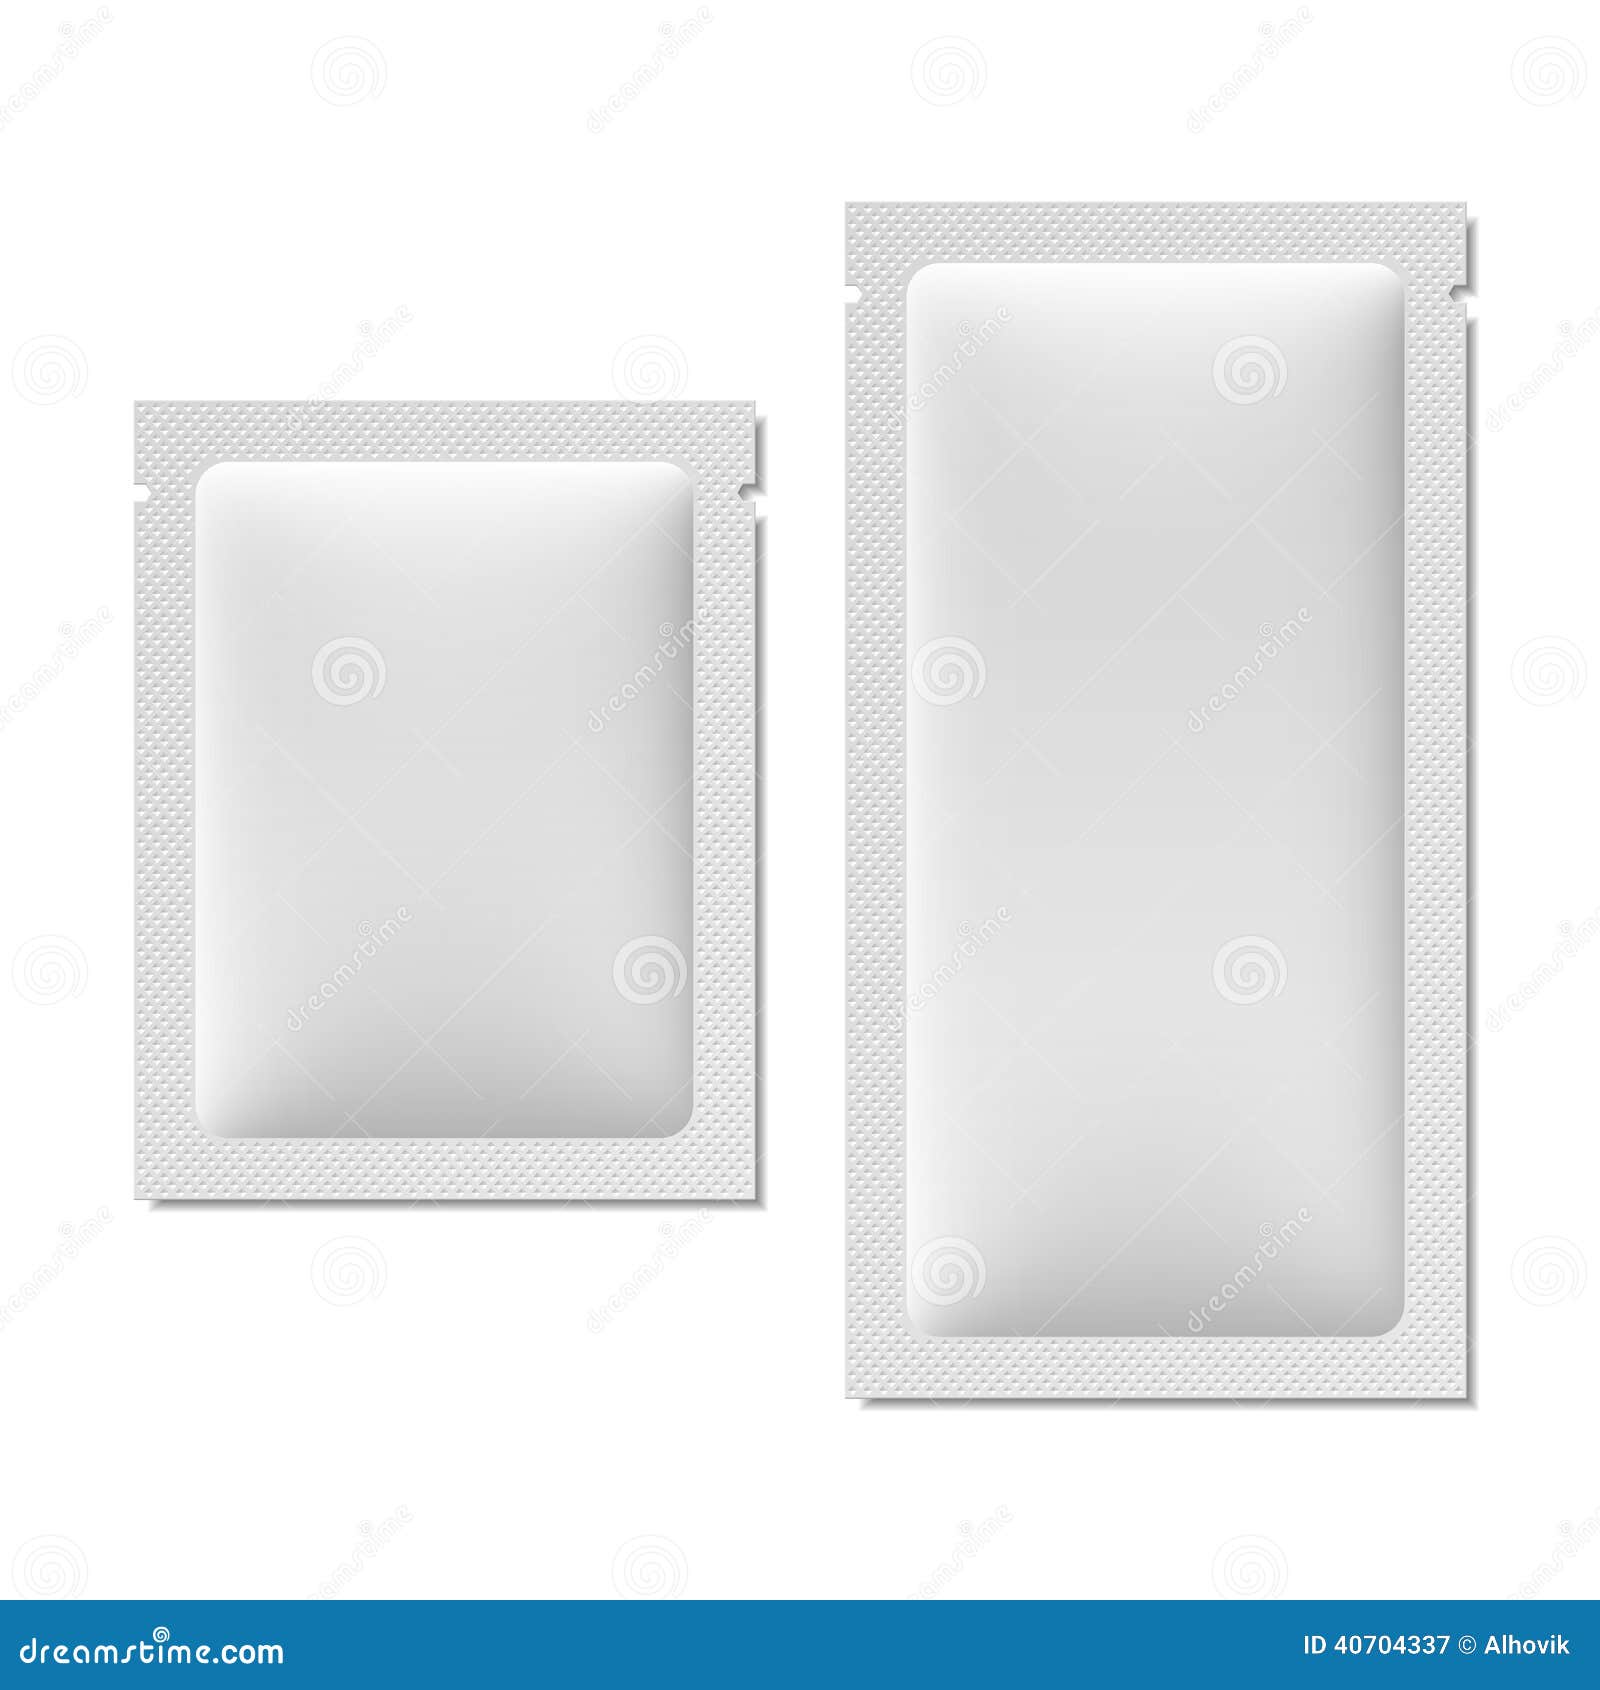 white blank sachet packaging for food, cosmetics, or medicine